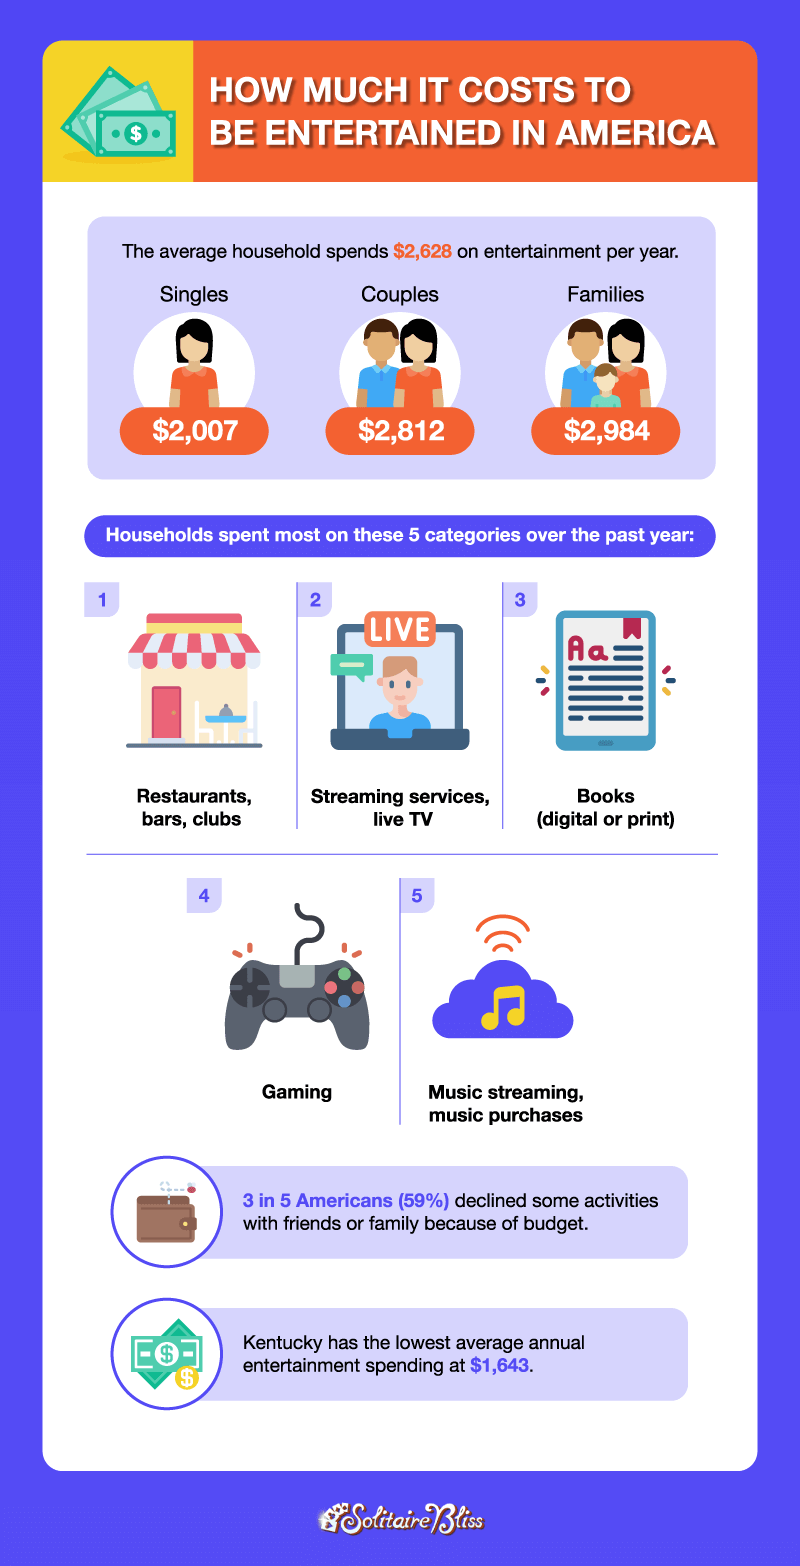 how much it costs to be entertained and where Americans spend most